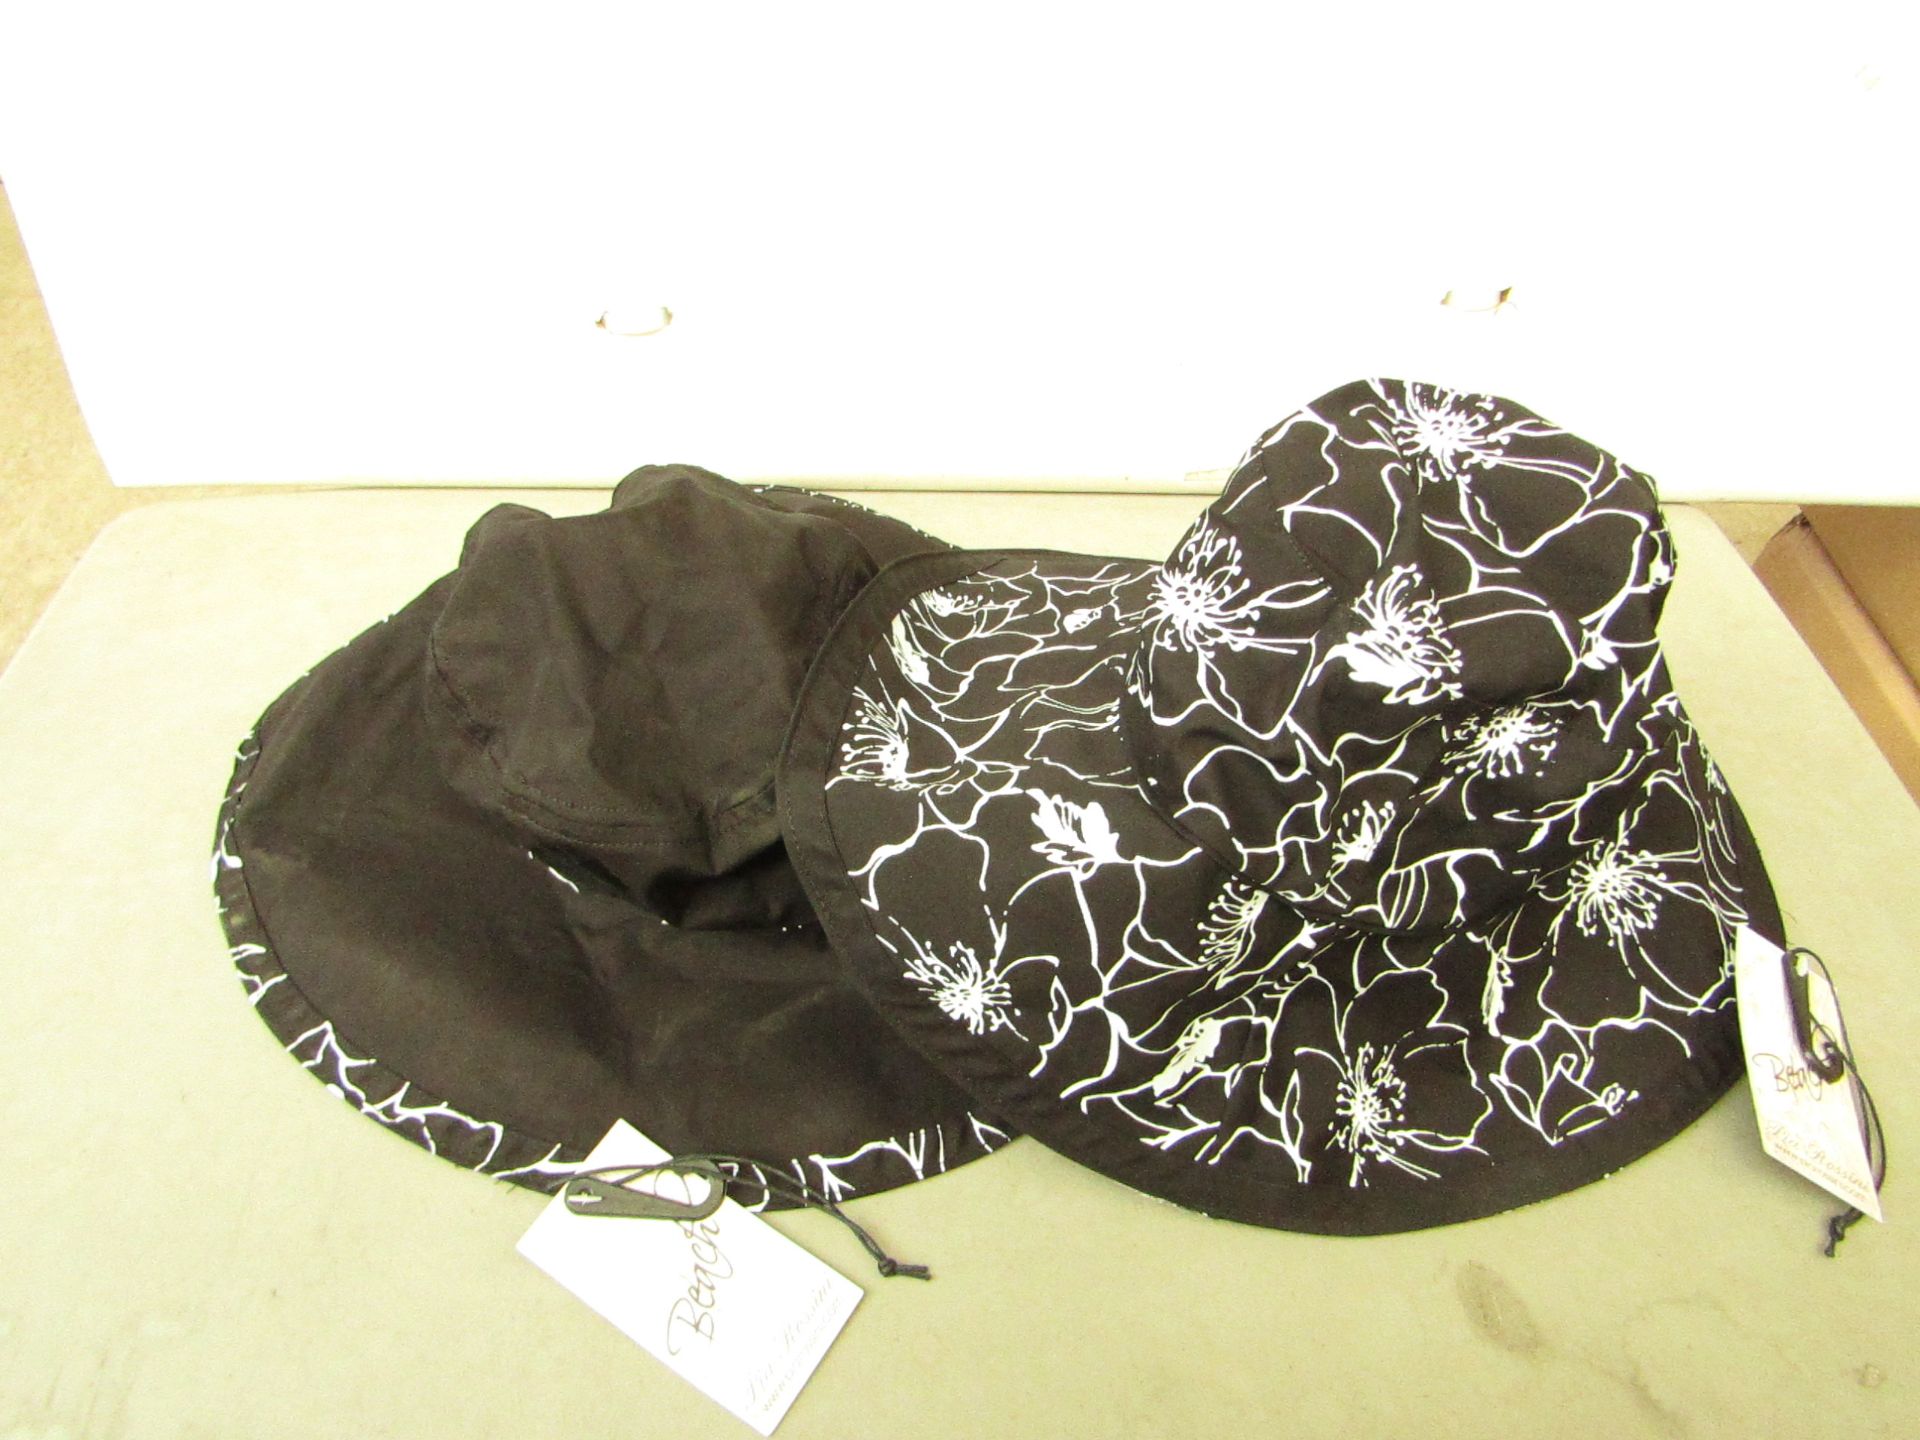 3 x Pi Rossini Ladies Reversable Beach Hats new with tag (see image for colour)